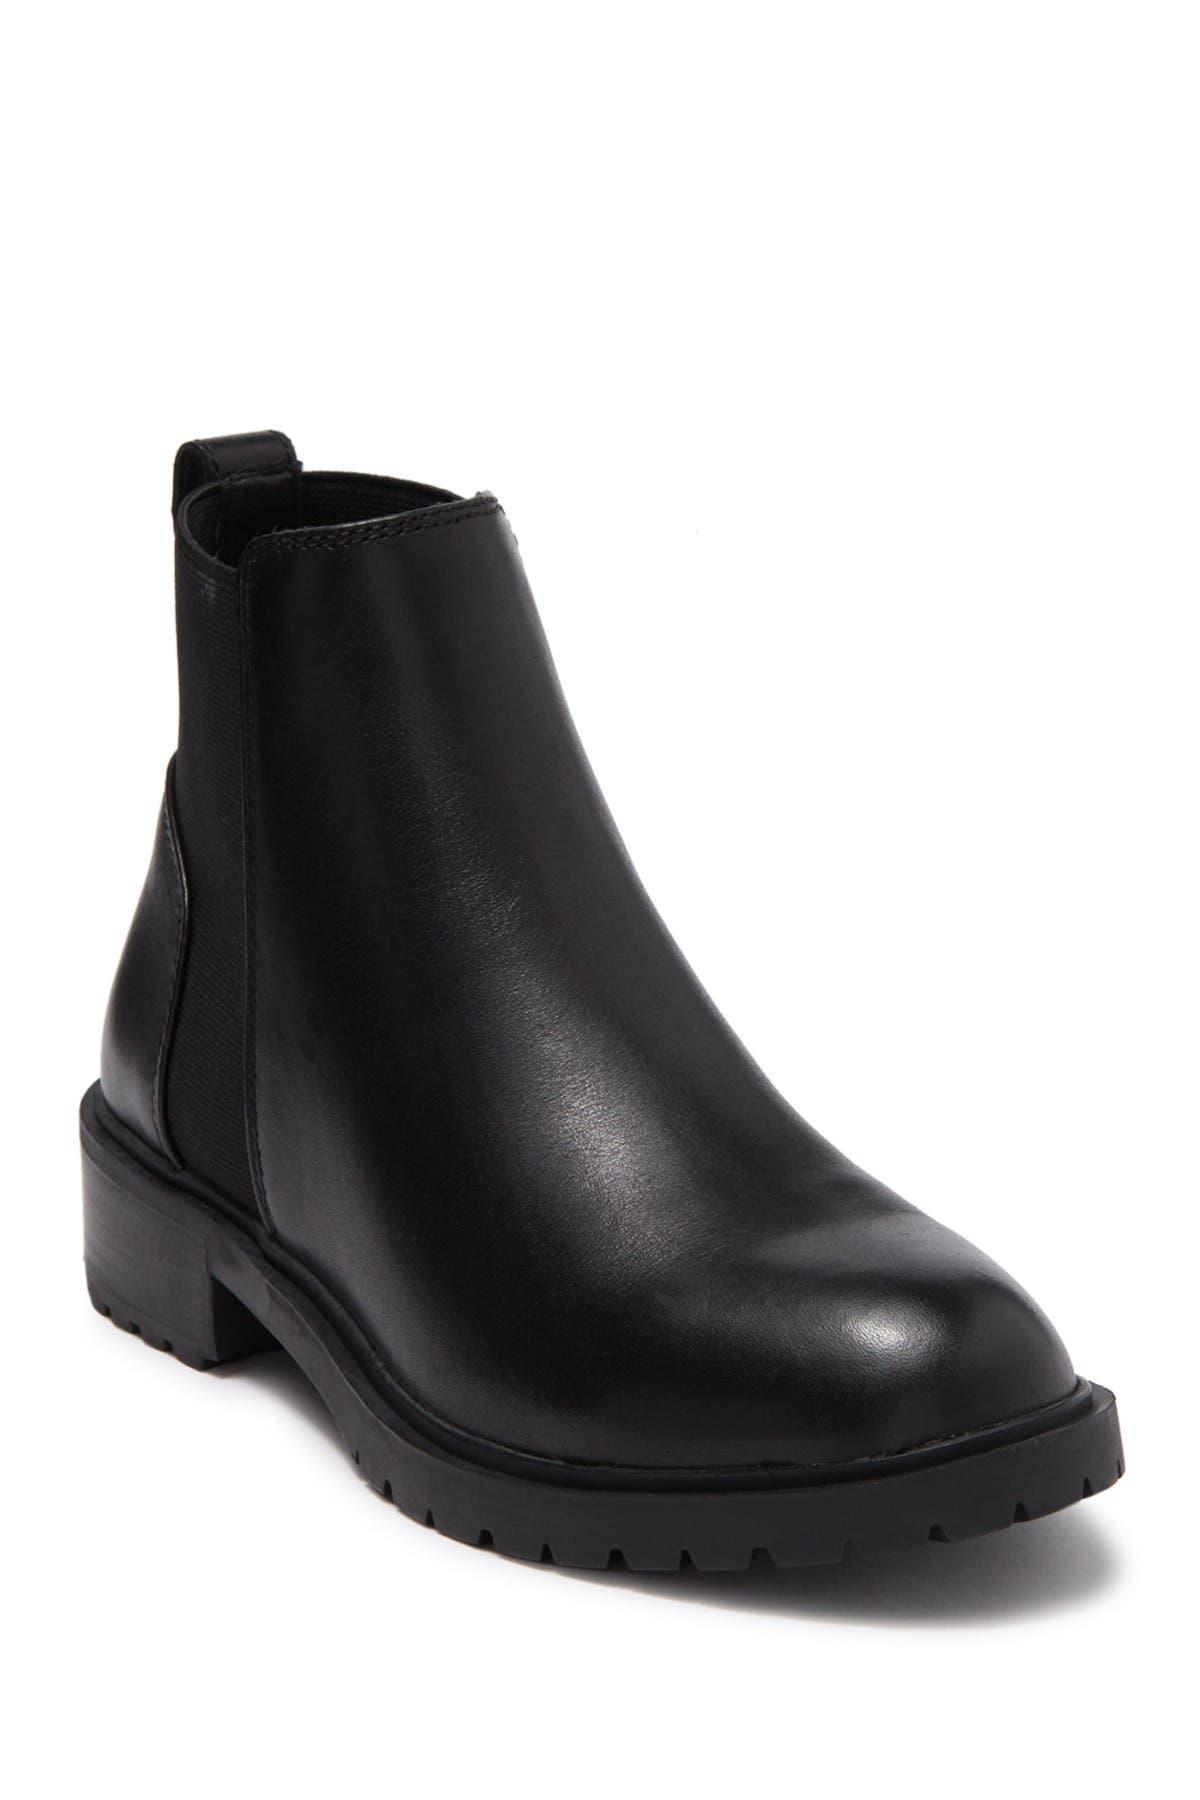 motivo Admisión O después Steve Madden Buzzing Ankle Boot In Black Leather At Nordstrom Rack | Lyst